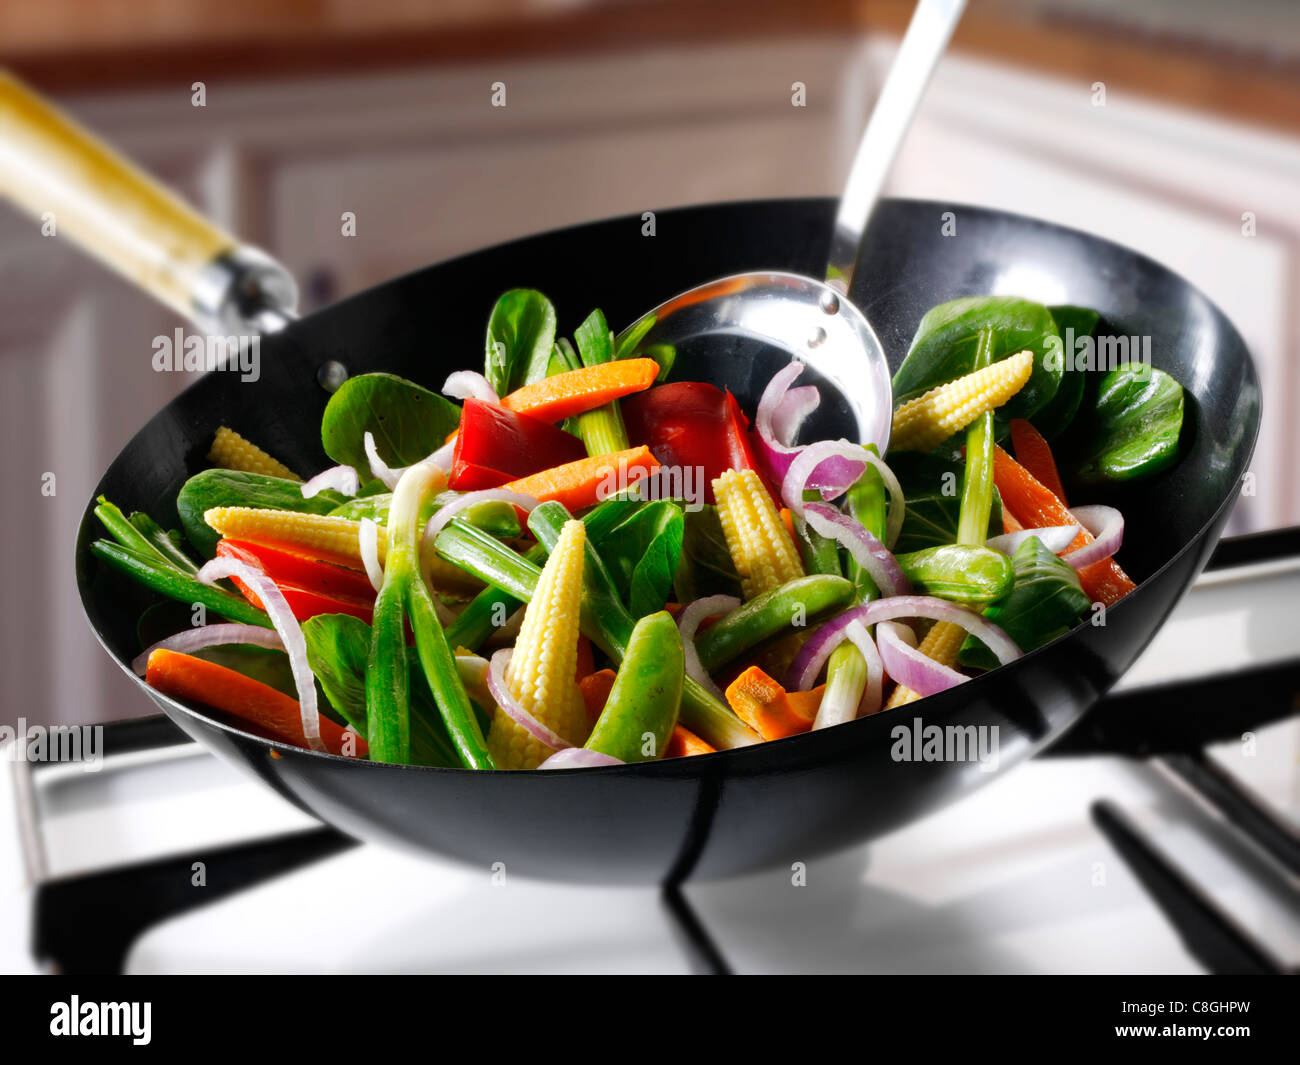 Stirfry cooking being cooked in a wok Stock Photo